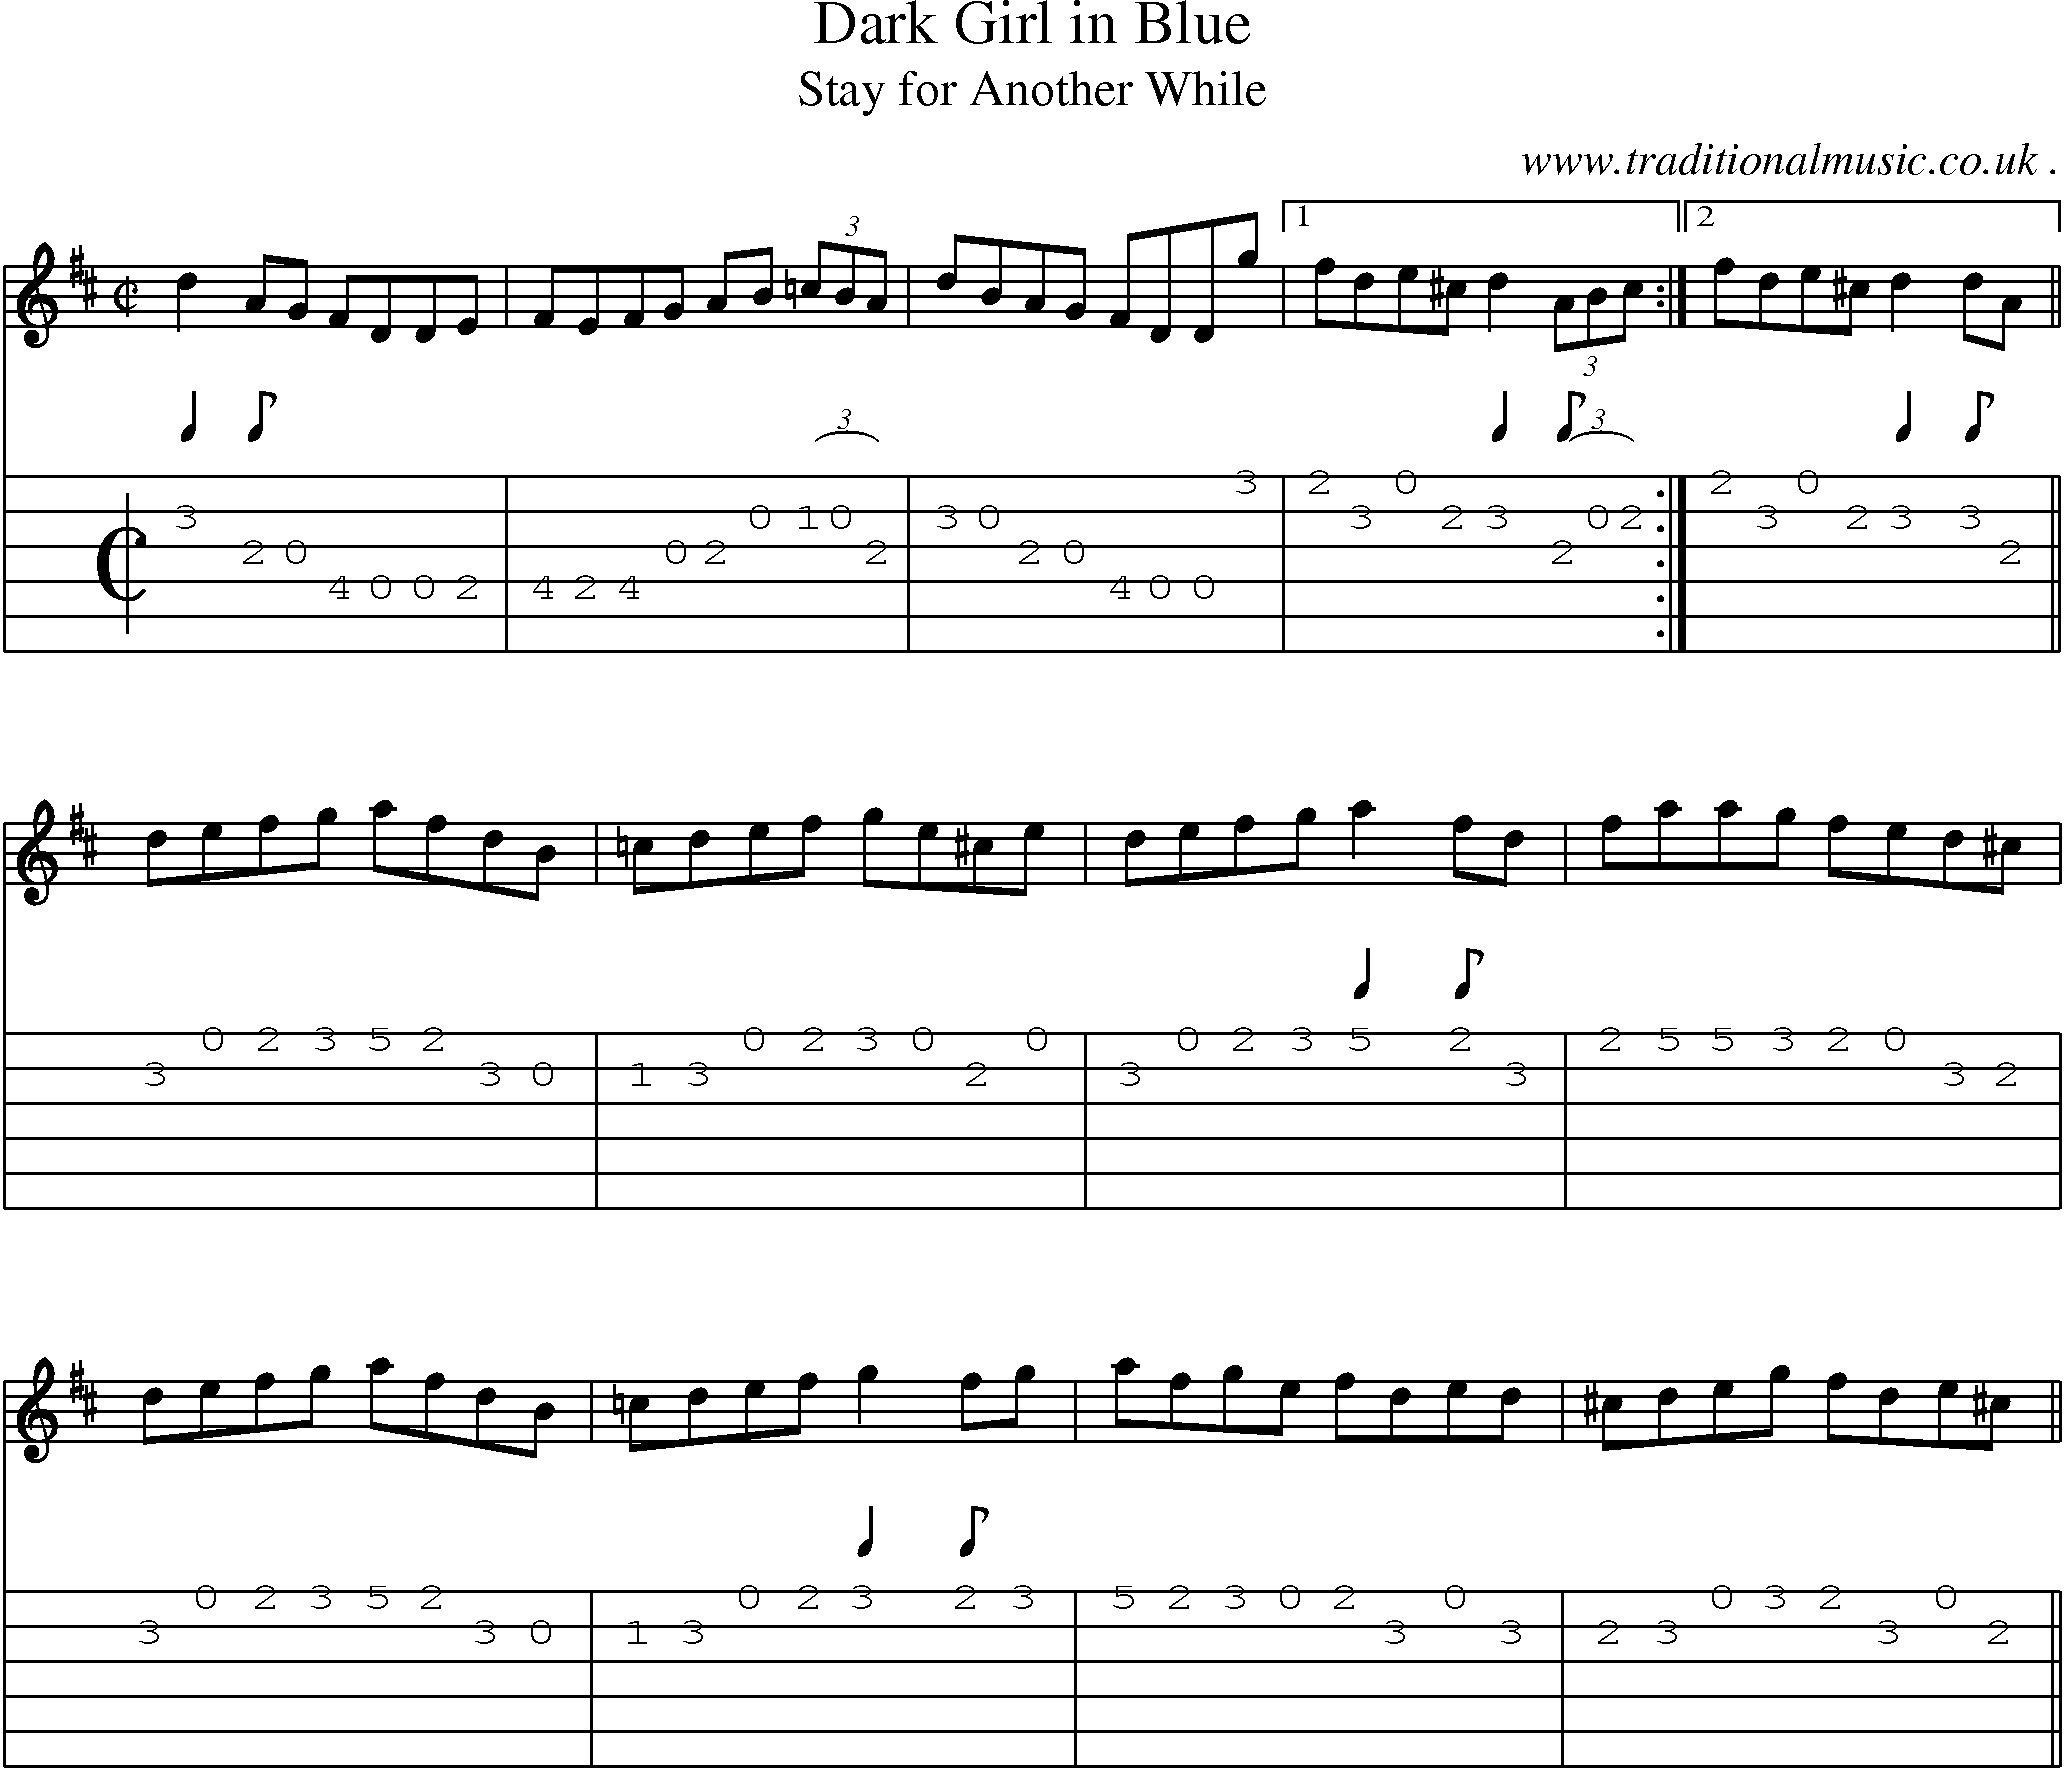 Sheet-Music and Guitar Tabs for Dark Girl In Blue